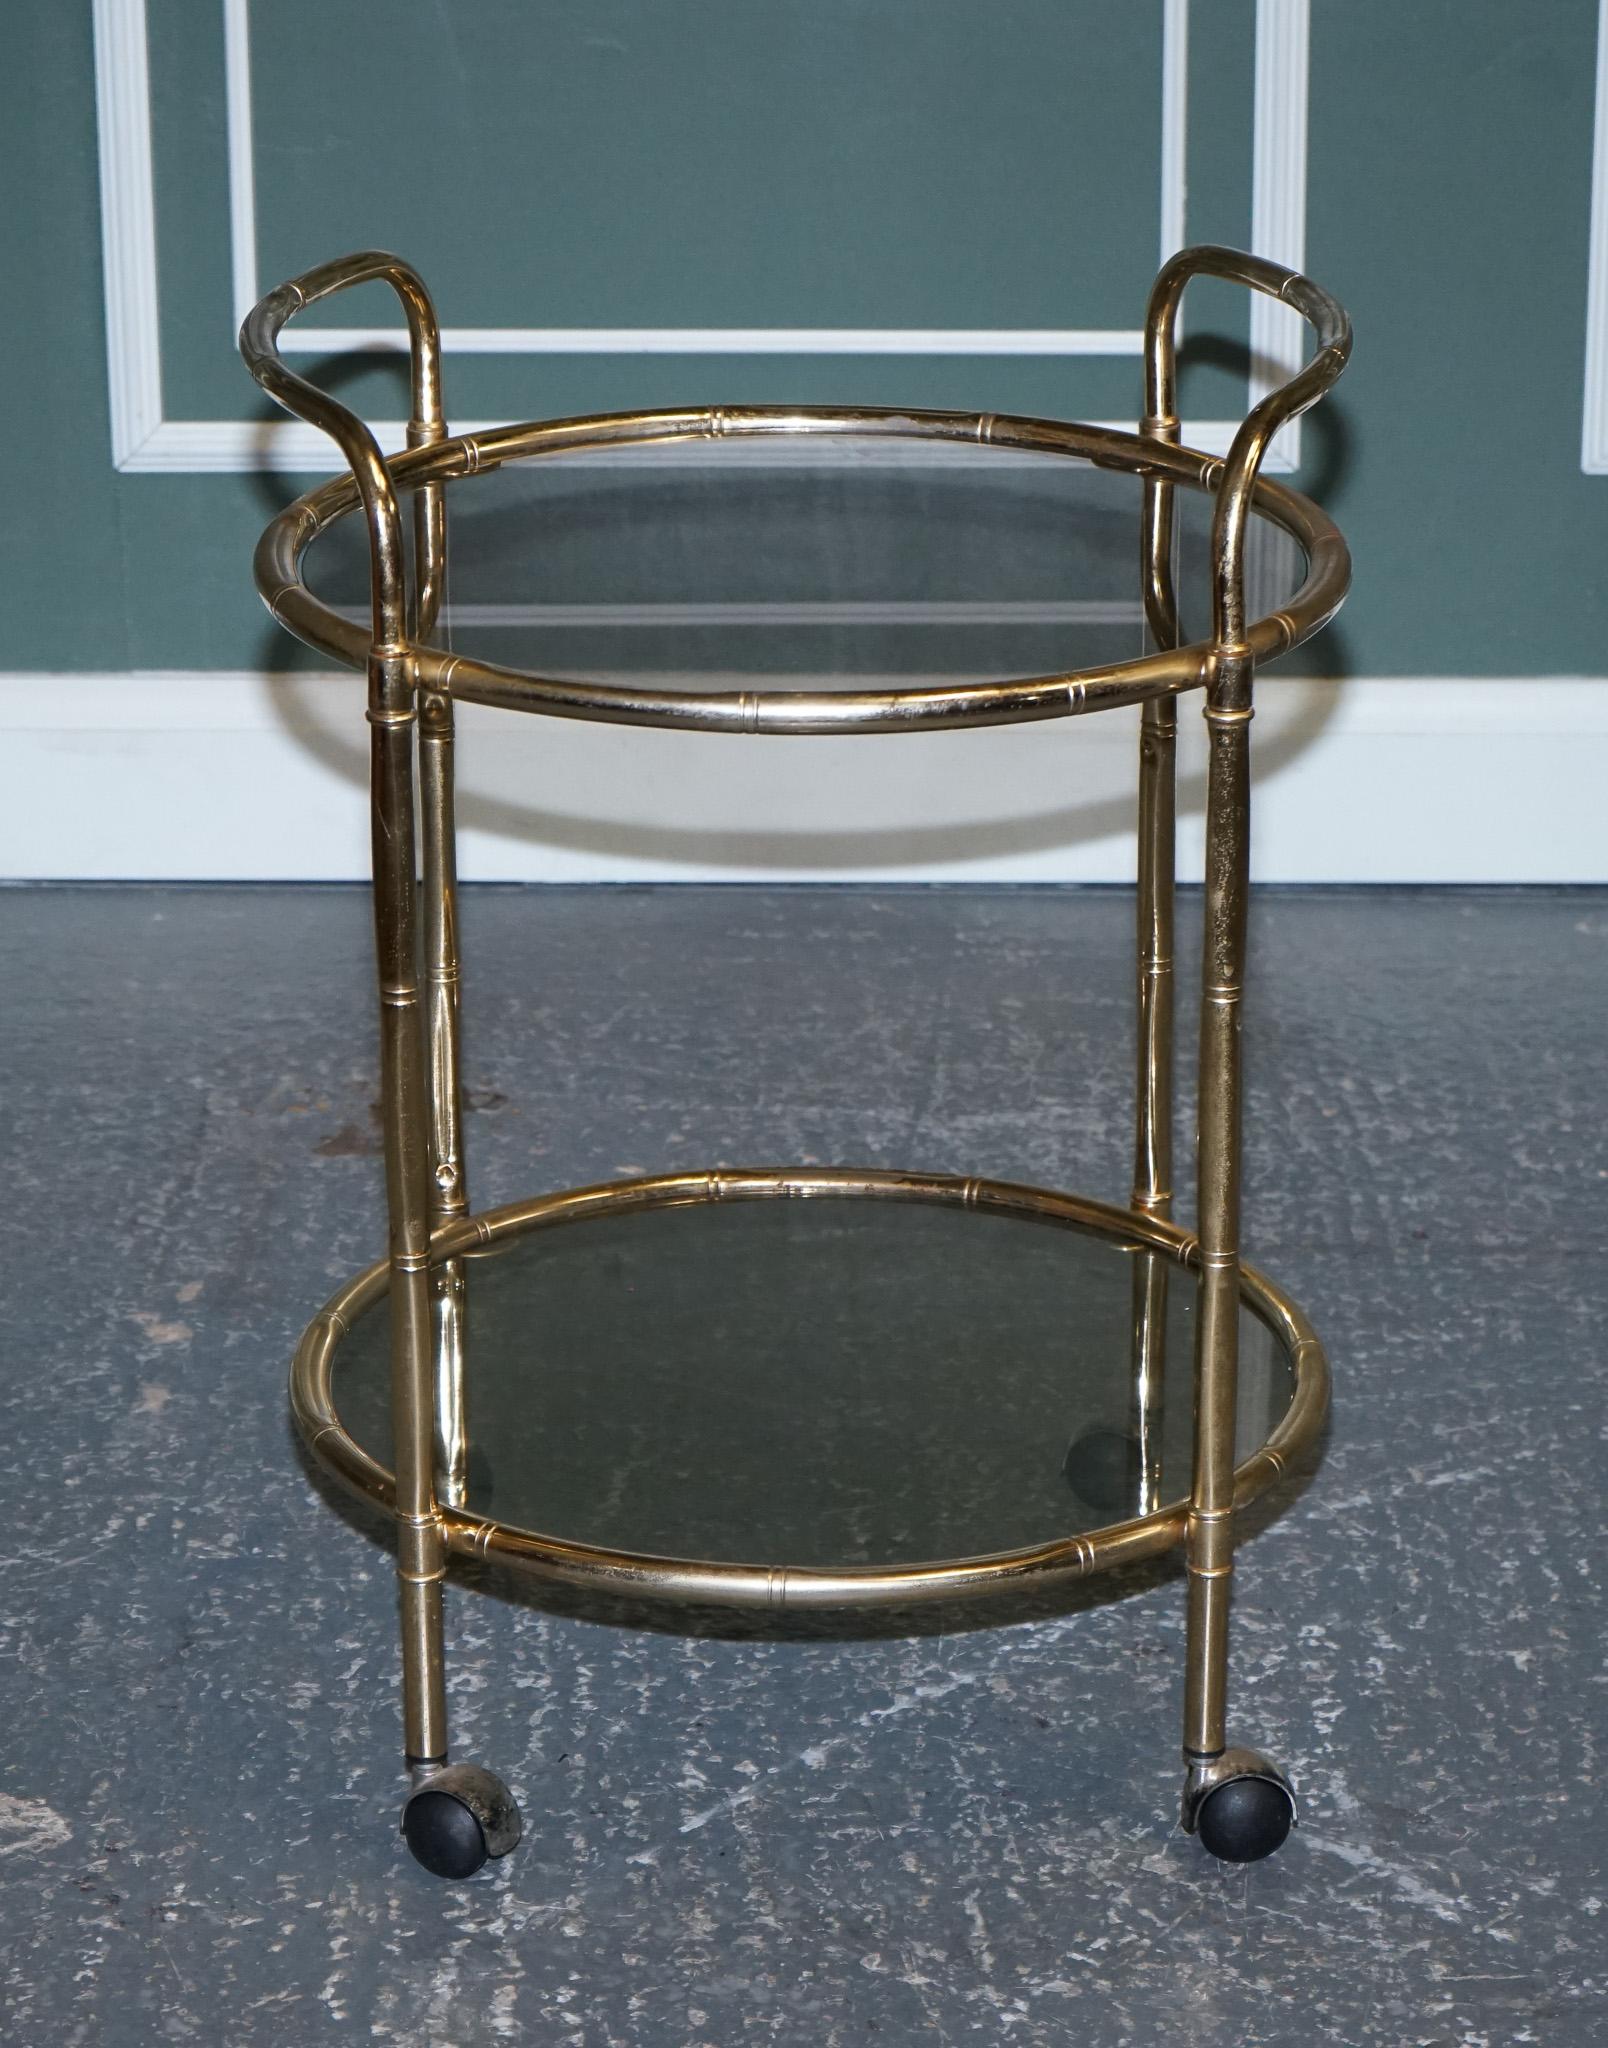 Hand-Crafted 1950s Hollywood Regency Italian Faux Bamboo Brass & Smoked Glass Bar Trolley